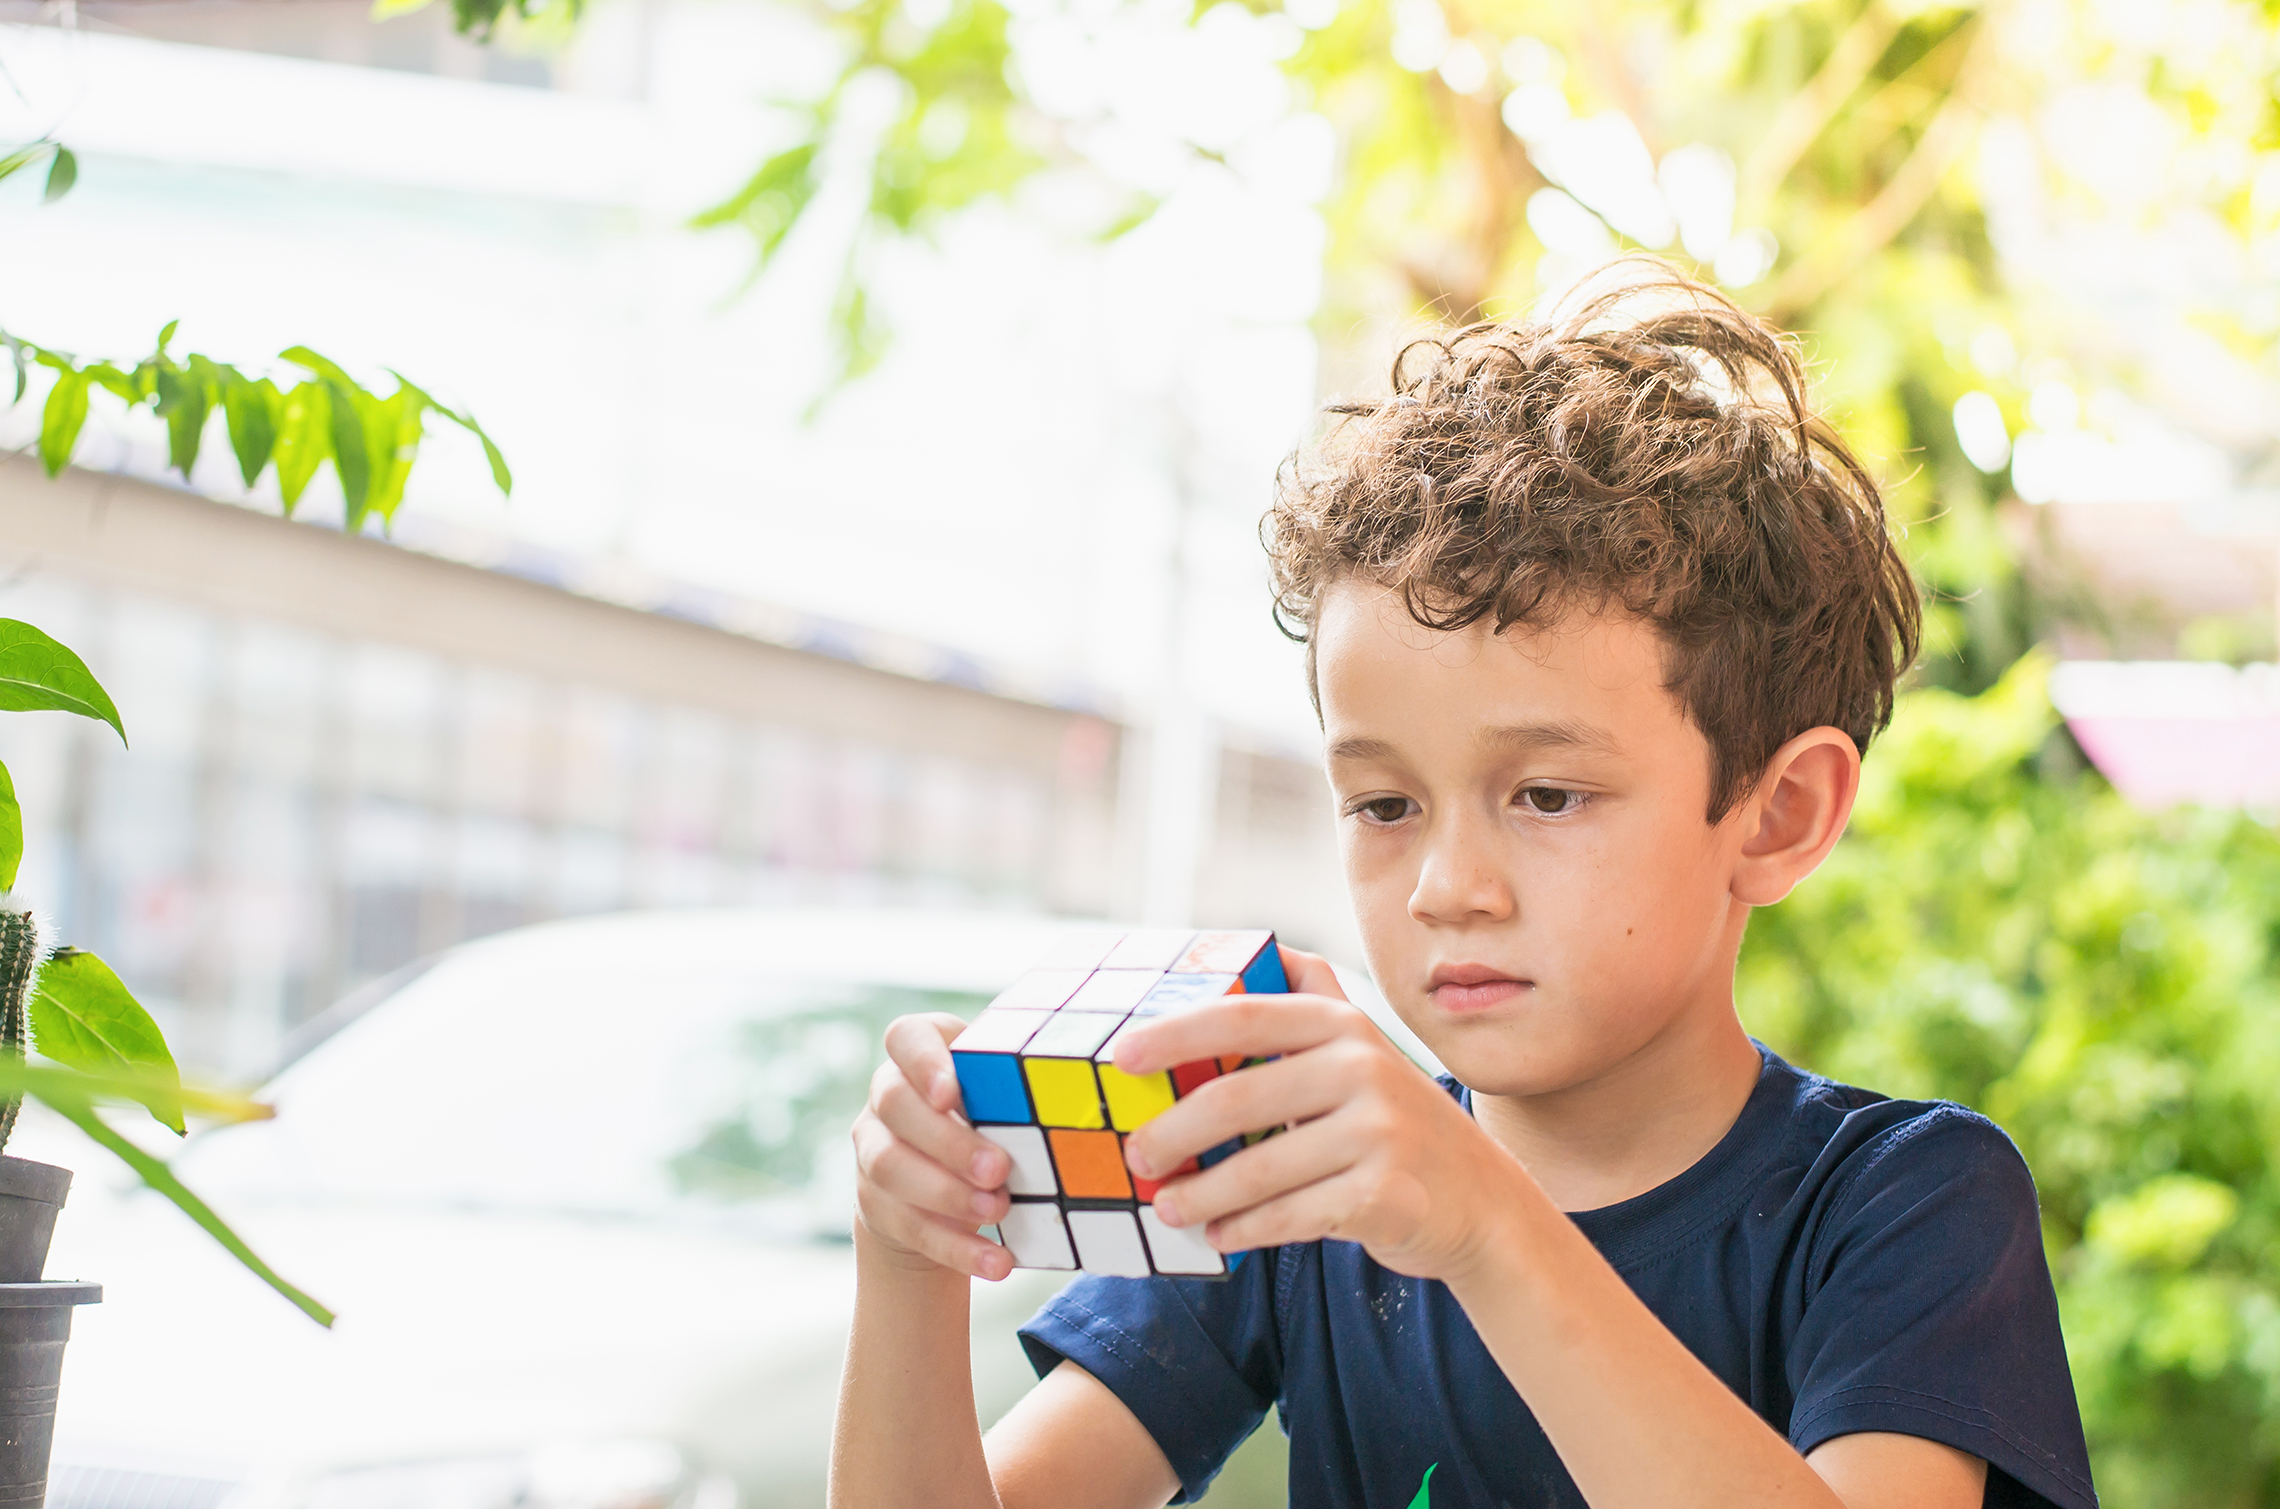 Rubik’s Cube at 50: It’s a Numbers Game